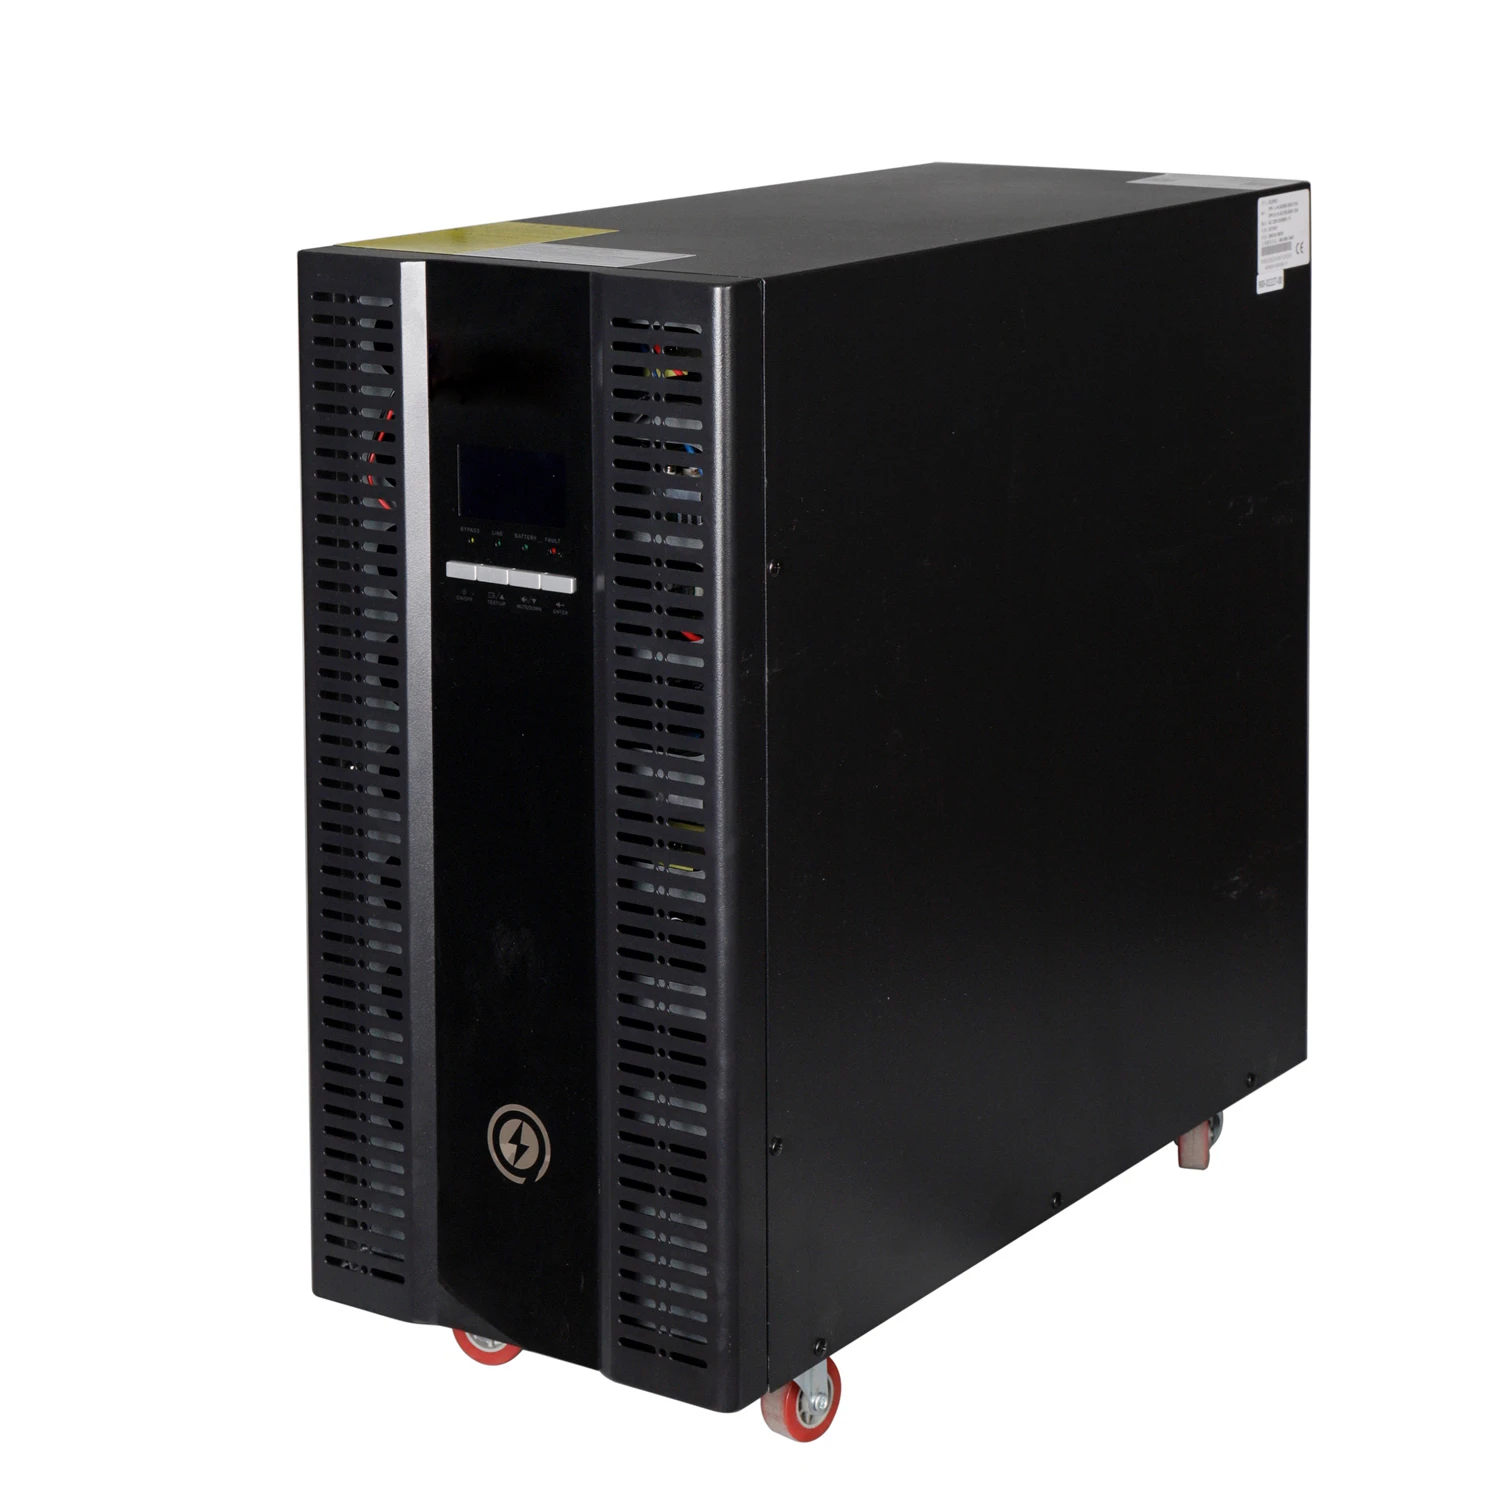 Online UPS high frequency machine 10kva uninterruptible power supply backup for computer